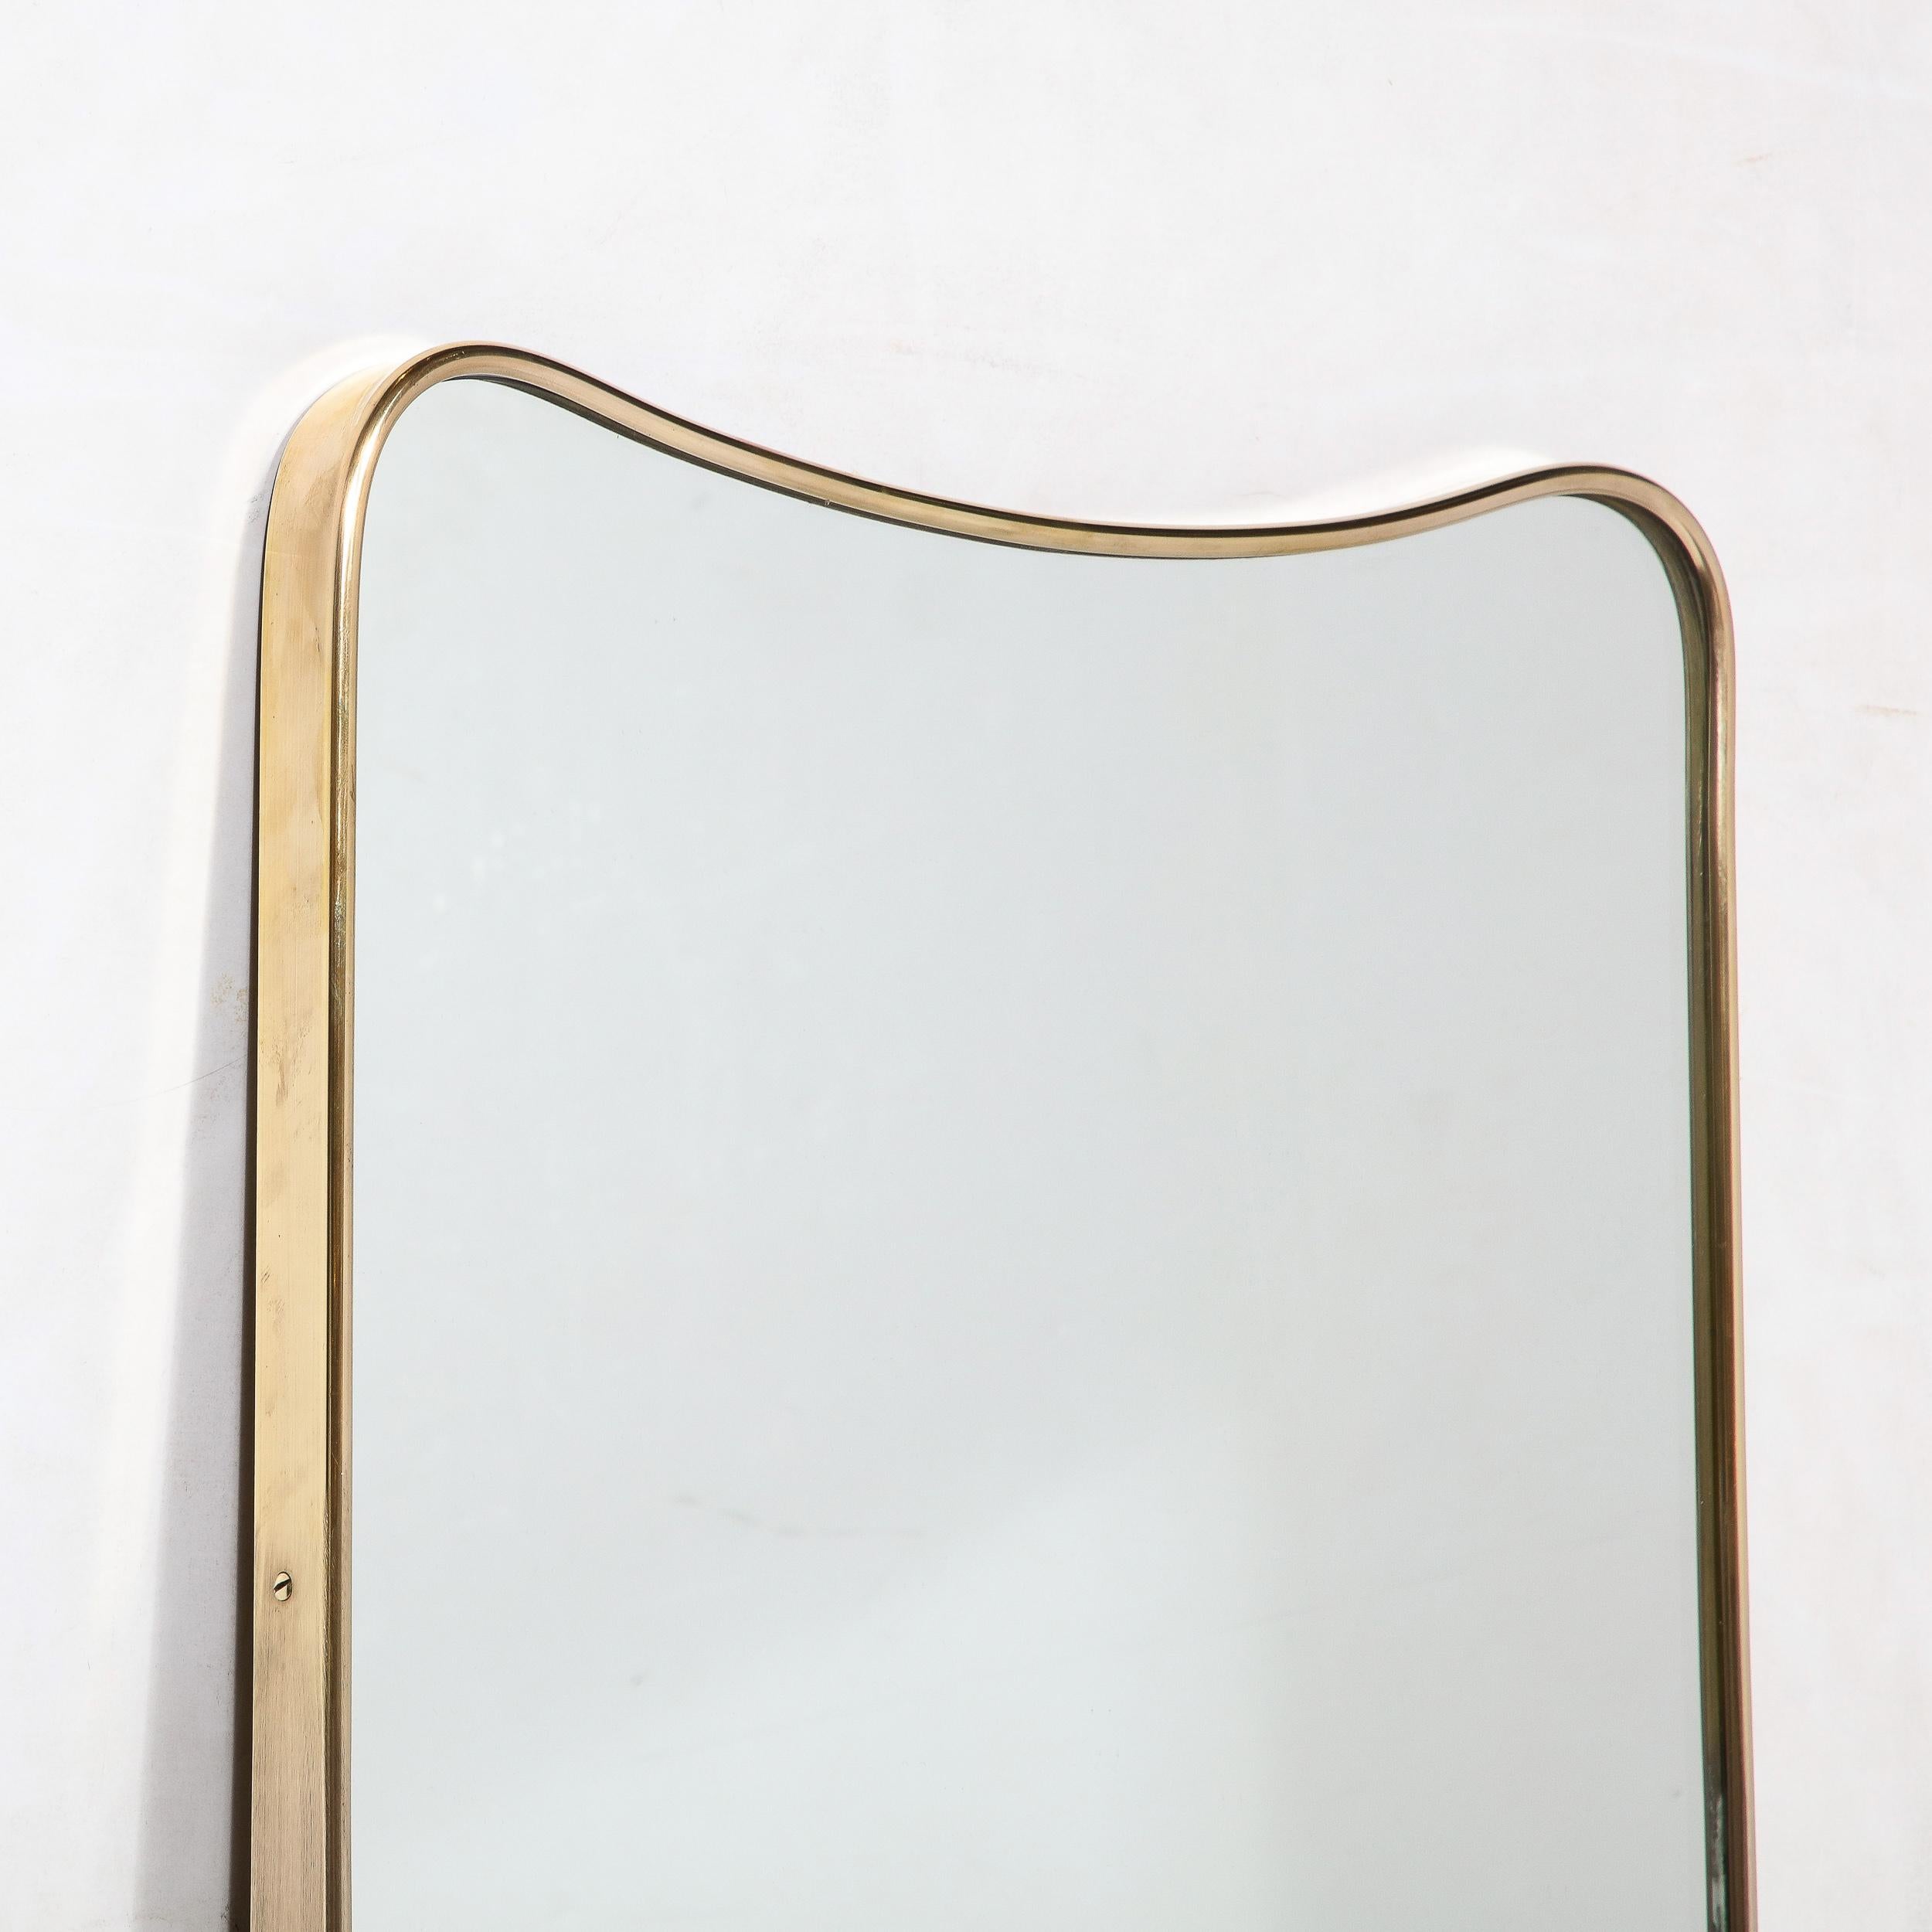 Mid-Century Modernist Brass Wrapped Mirror with Rounded Top Detailing 1